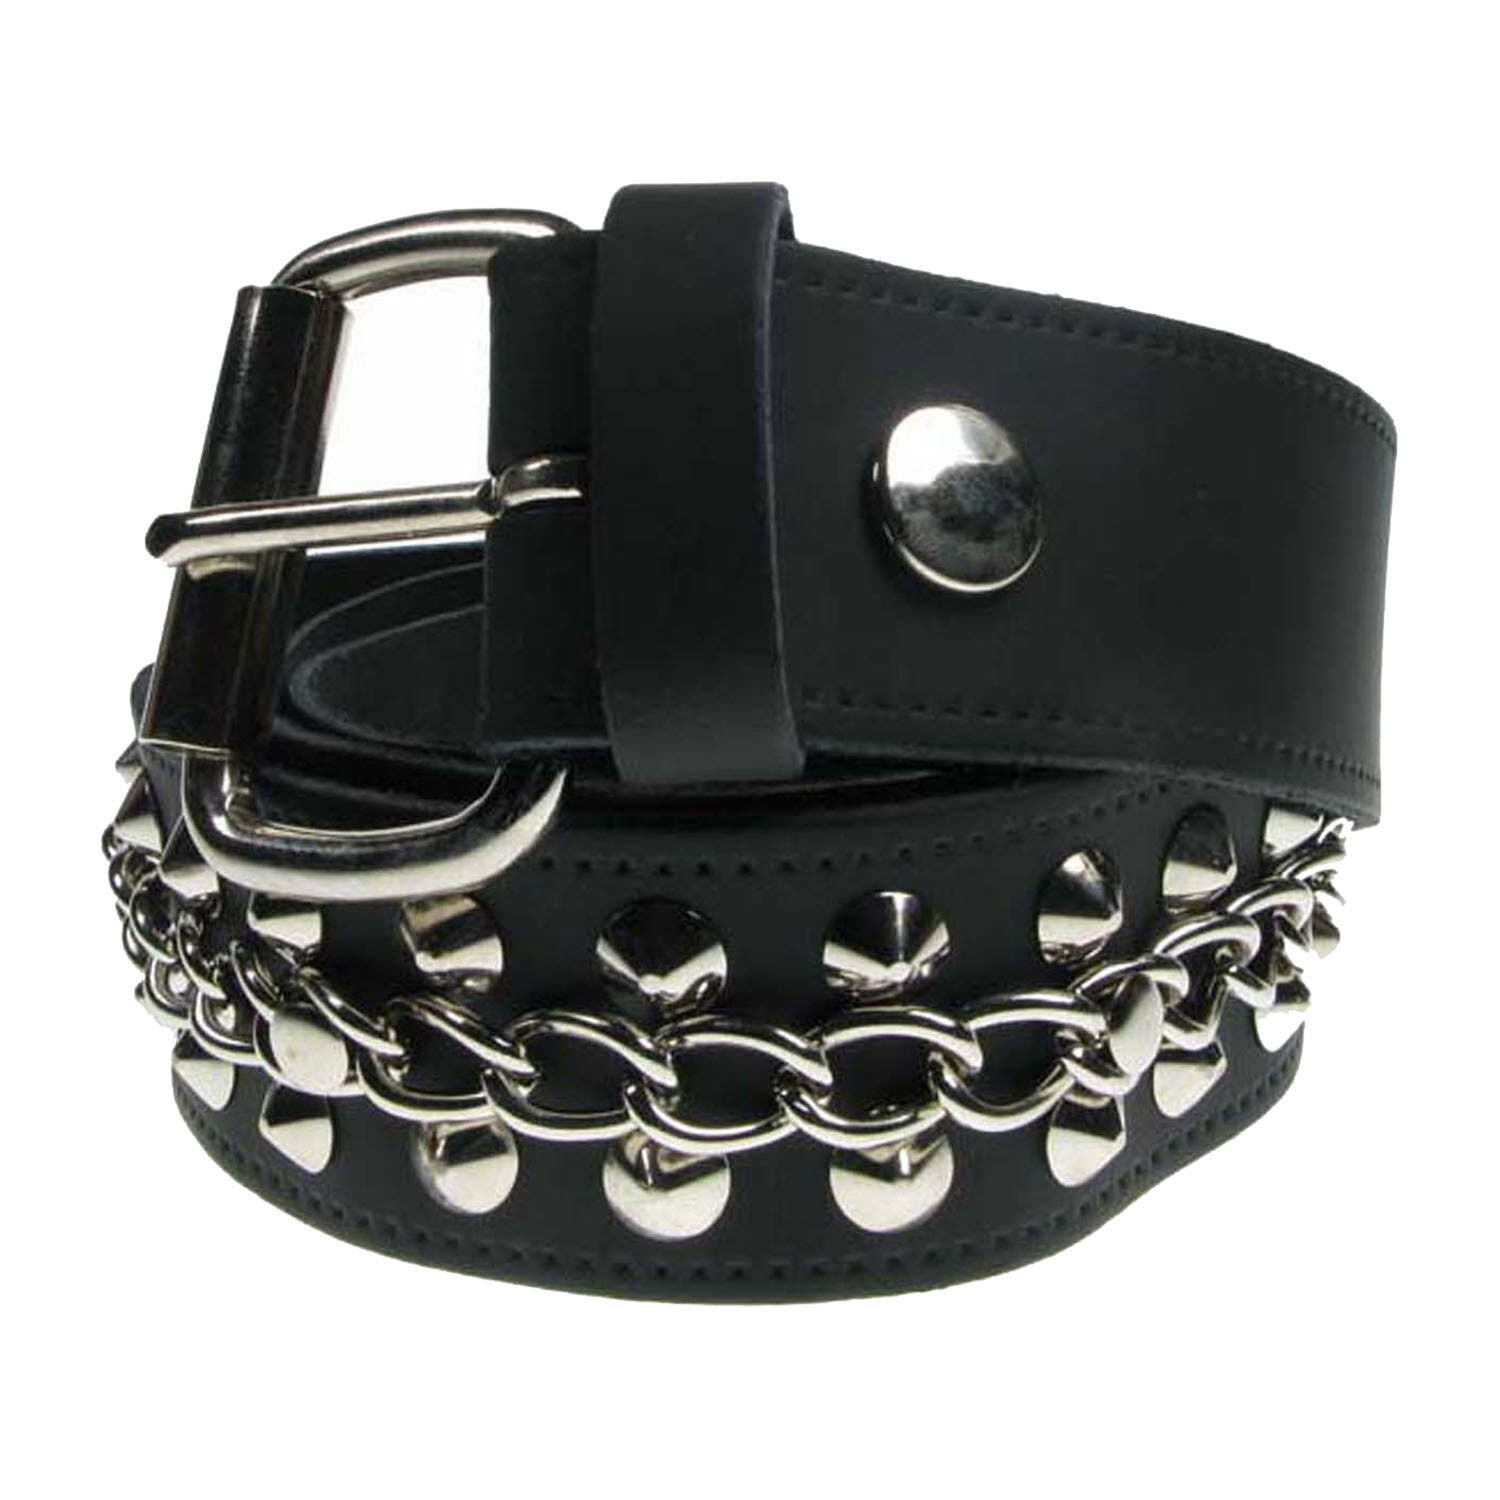 2 Row Conical With Chain Through Middle, Real Leather Black Belt 1.5 ...